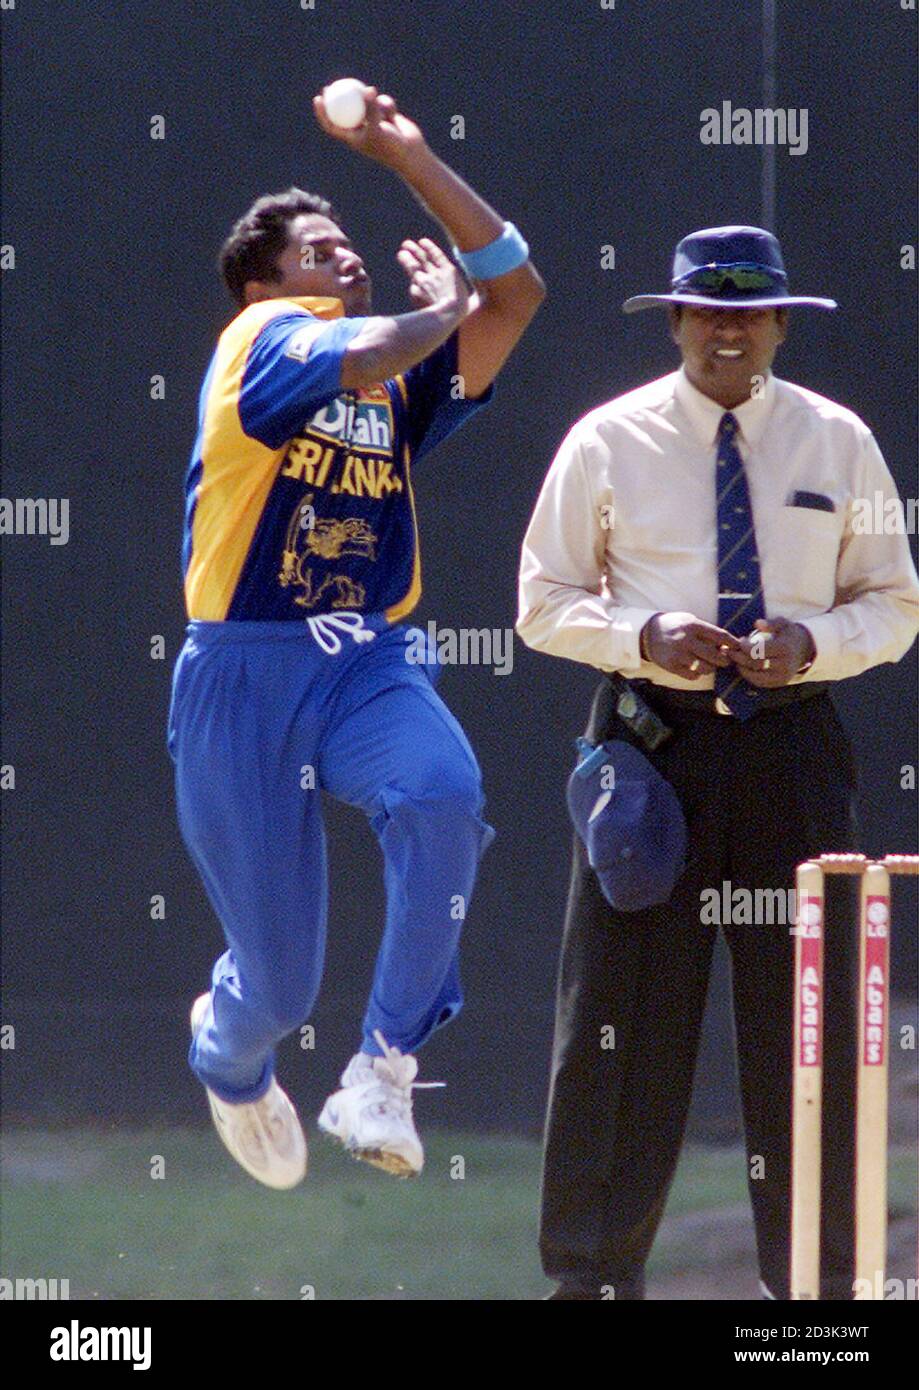 Sri Lankan fast bowler Chaminda Vaas (L) bowls against Zimbabwe as umpire Gamini Silva watches in the curtain raiser of the LG triangular tournament at Sinhalese Sports Club ground in Colombo on December 8, 2001. Vaas created a new world record by capturing eight wickets for 19 runs as the visitors were bowled out for 38 runs. Sri Lanka won the game by nine wickets. REUTERS/Anuruddha Lokuhapuarachchi  AL/RCS Stock Photo